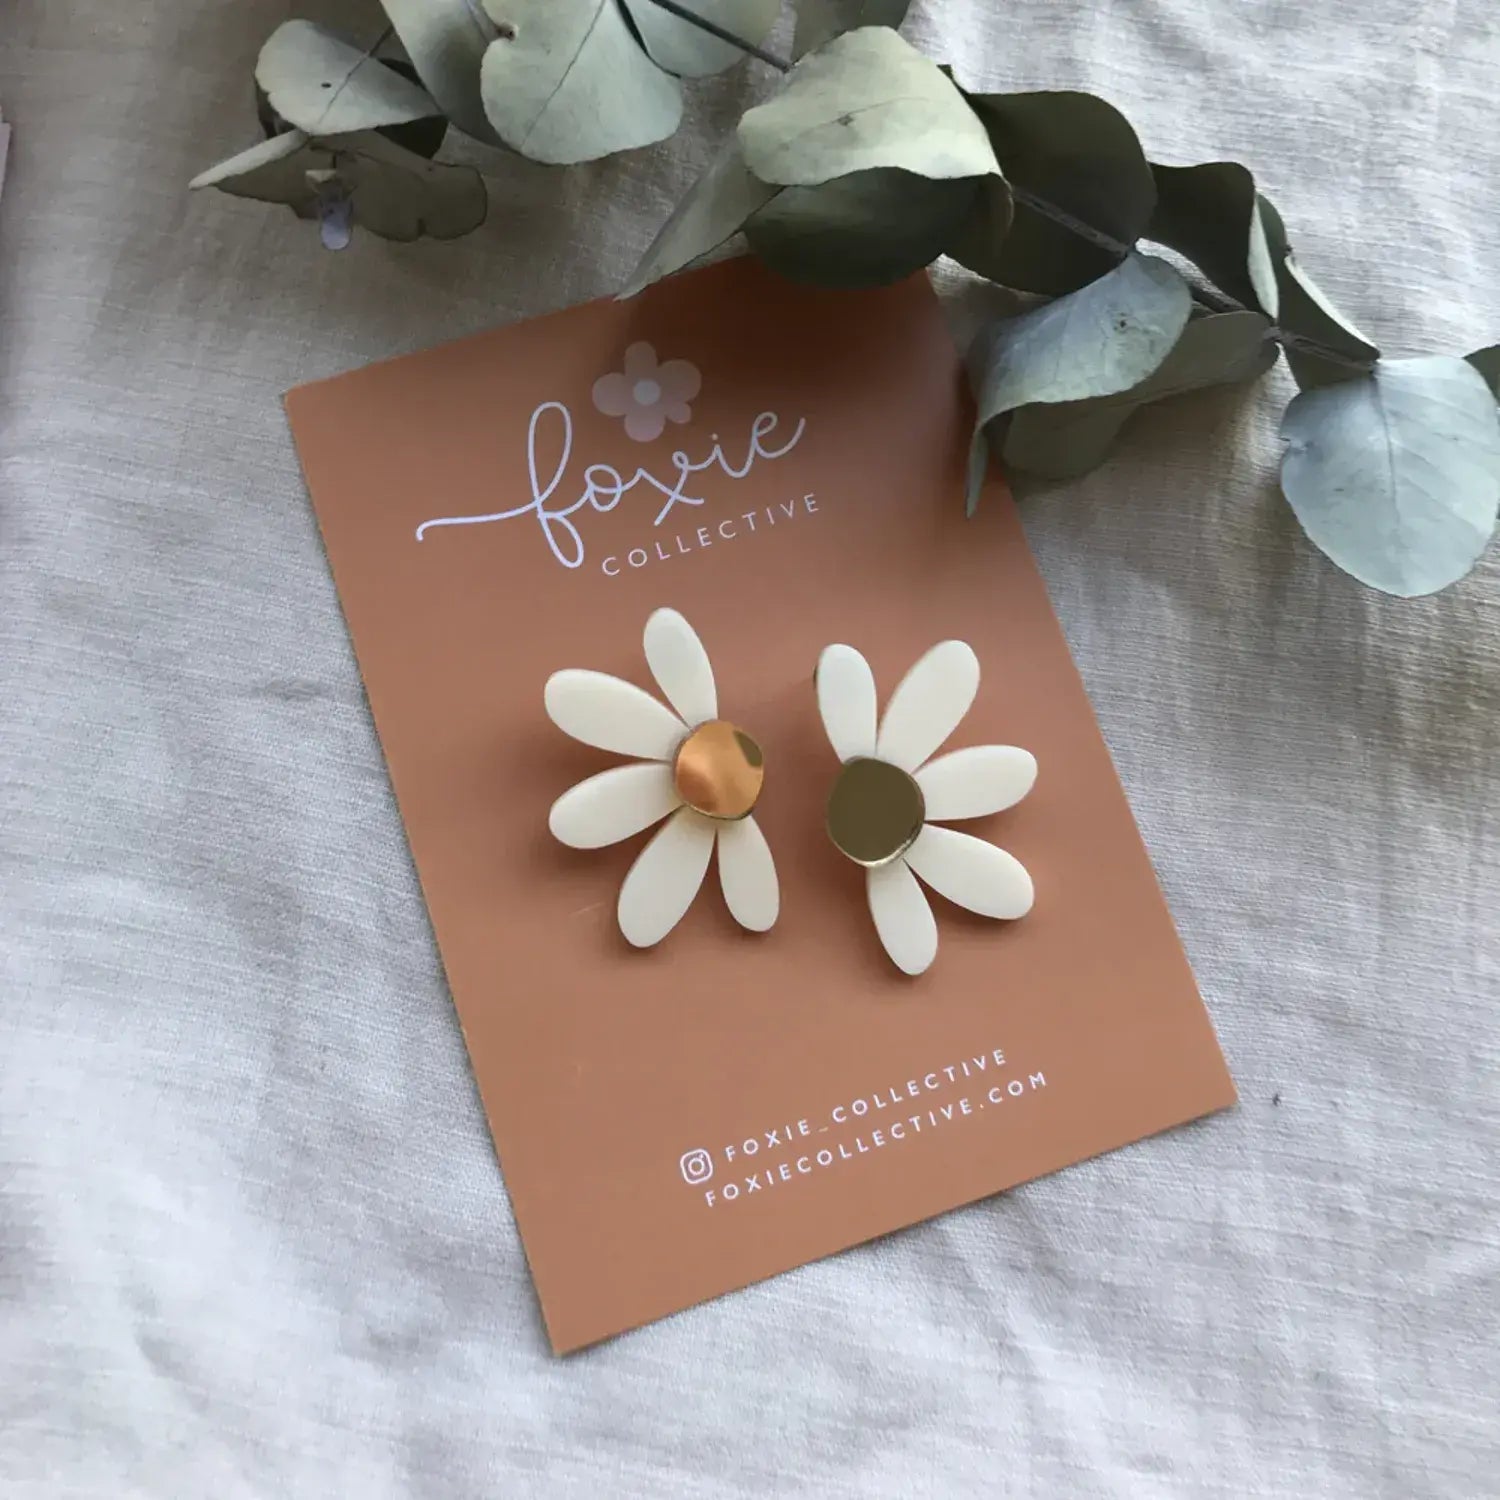 Handmade Jumbo Daisy Stud Earrings in Cream &amp; Gold by Foxie Collective